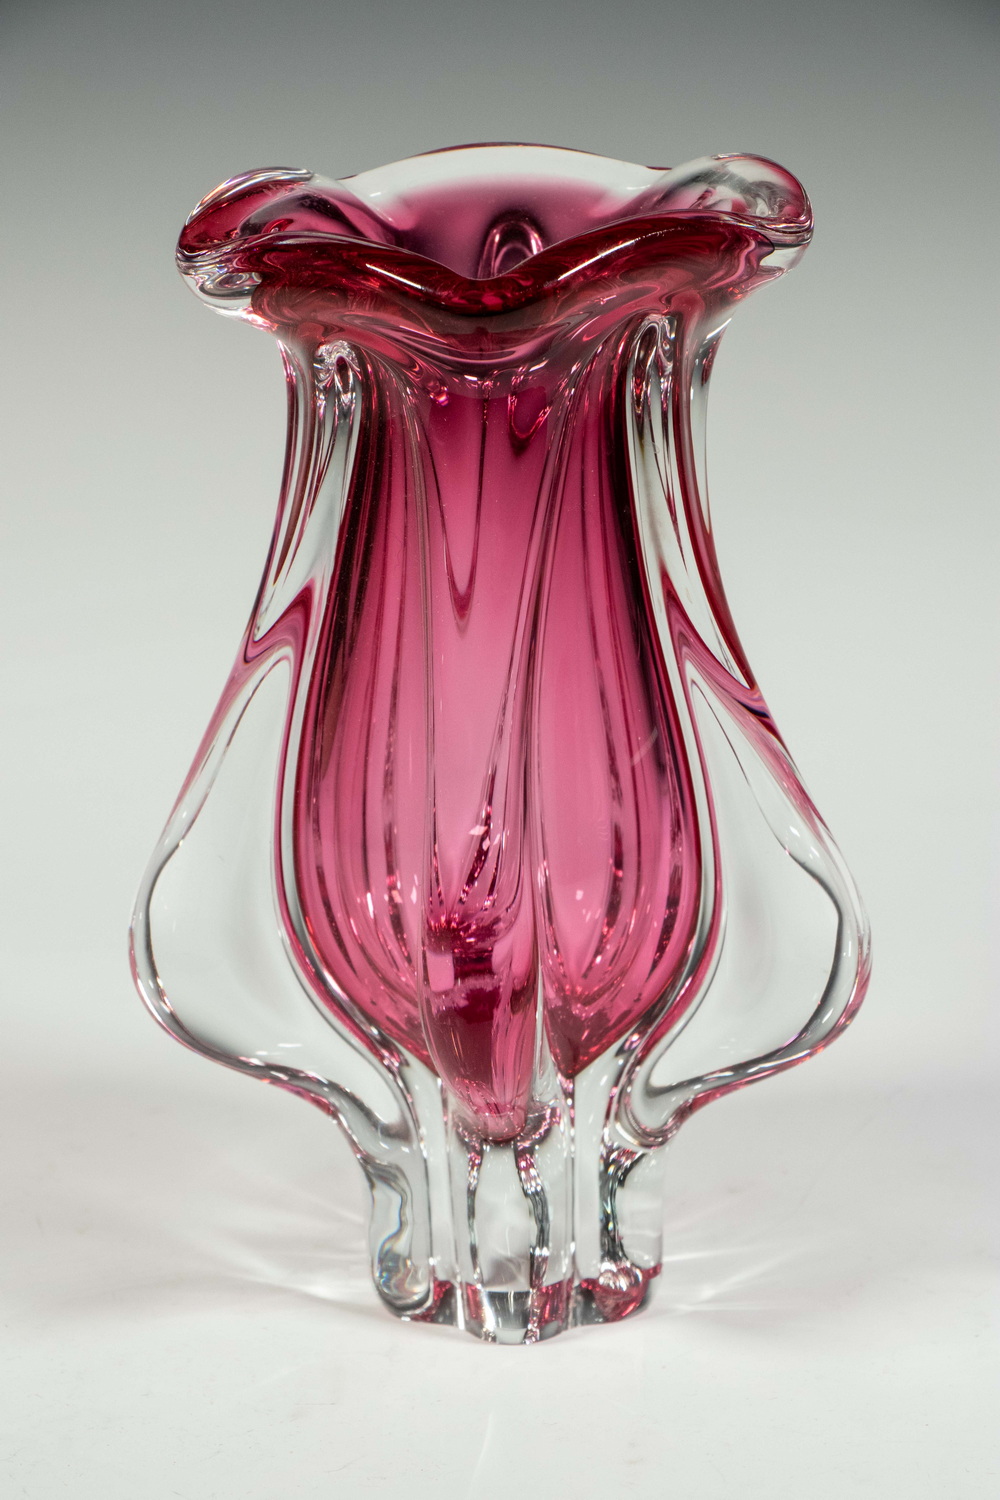 ART GLASS VASE 20th c. Cranberry to